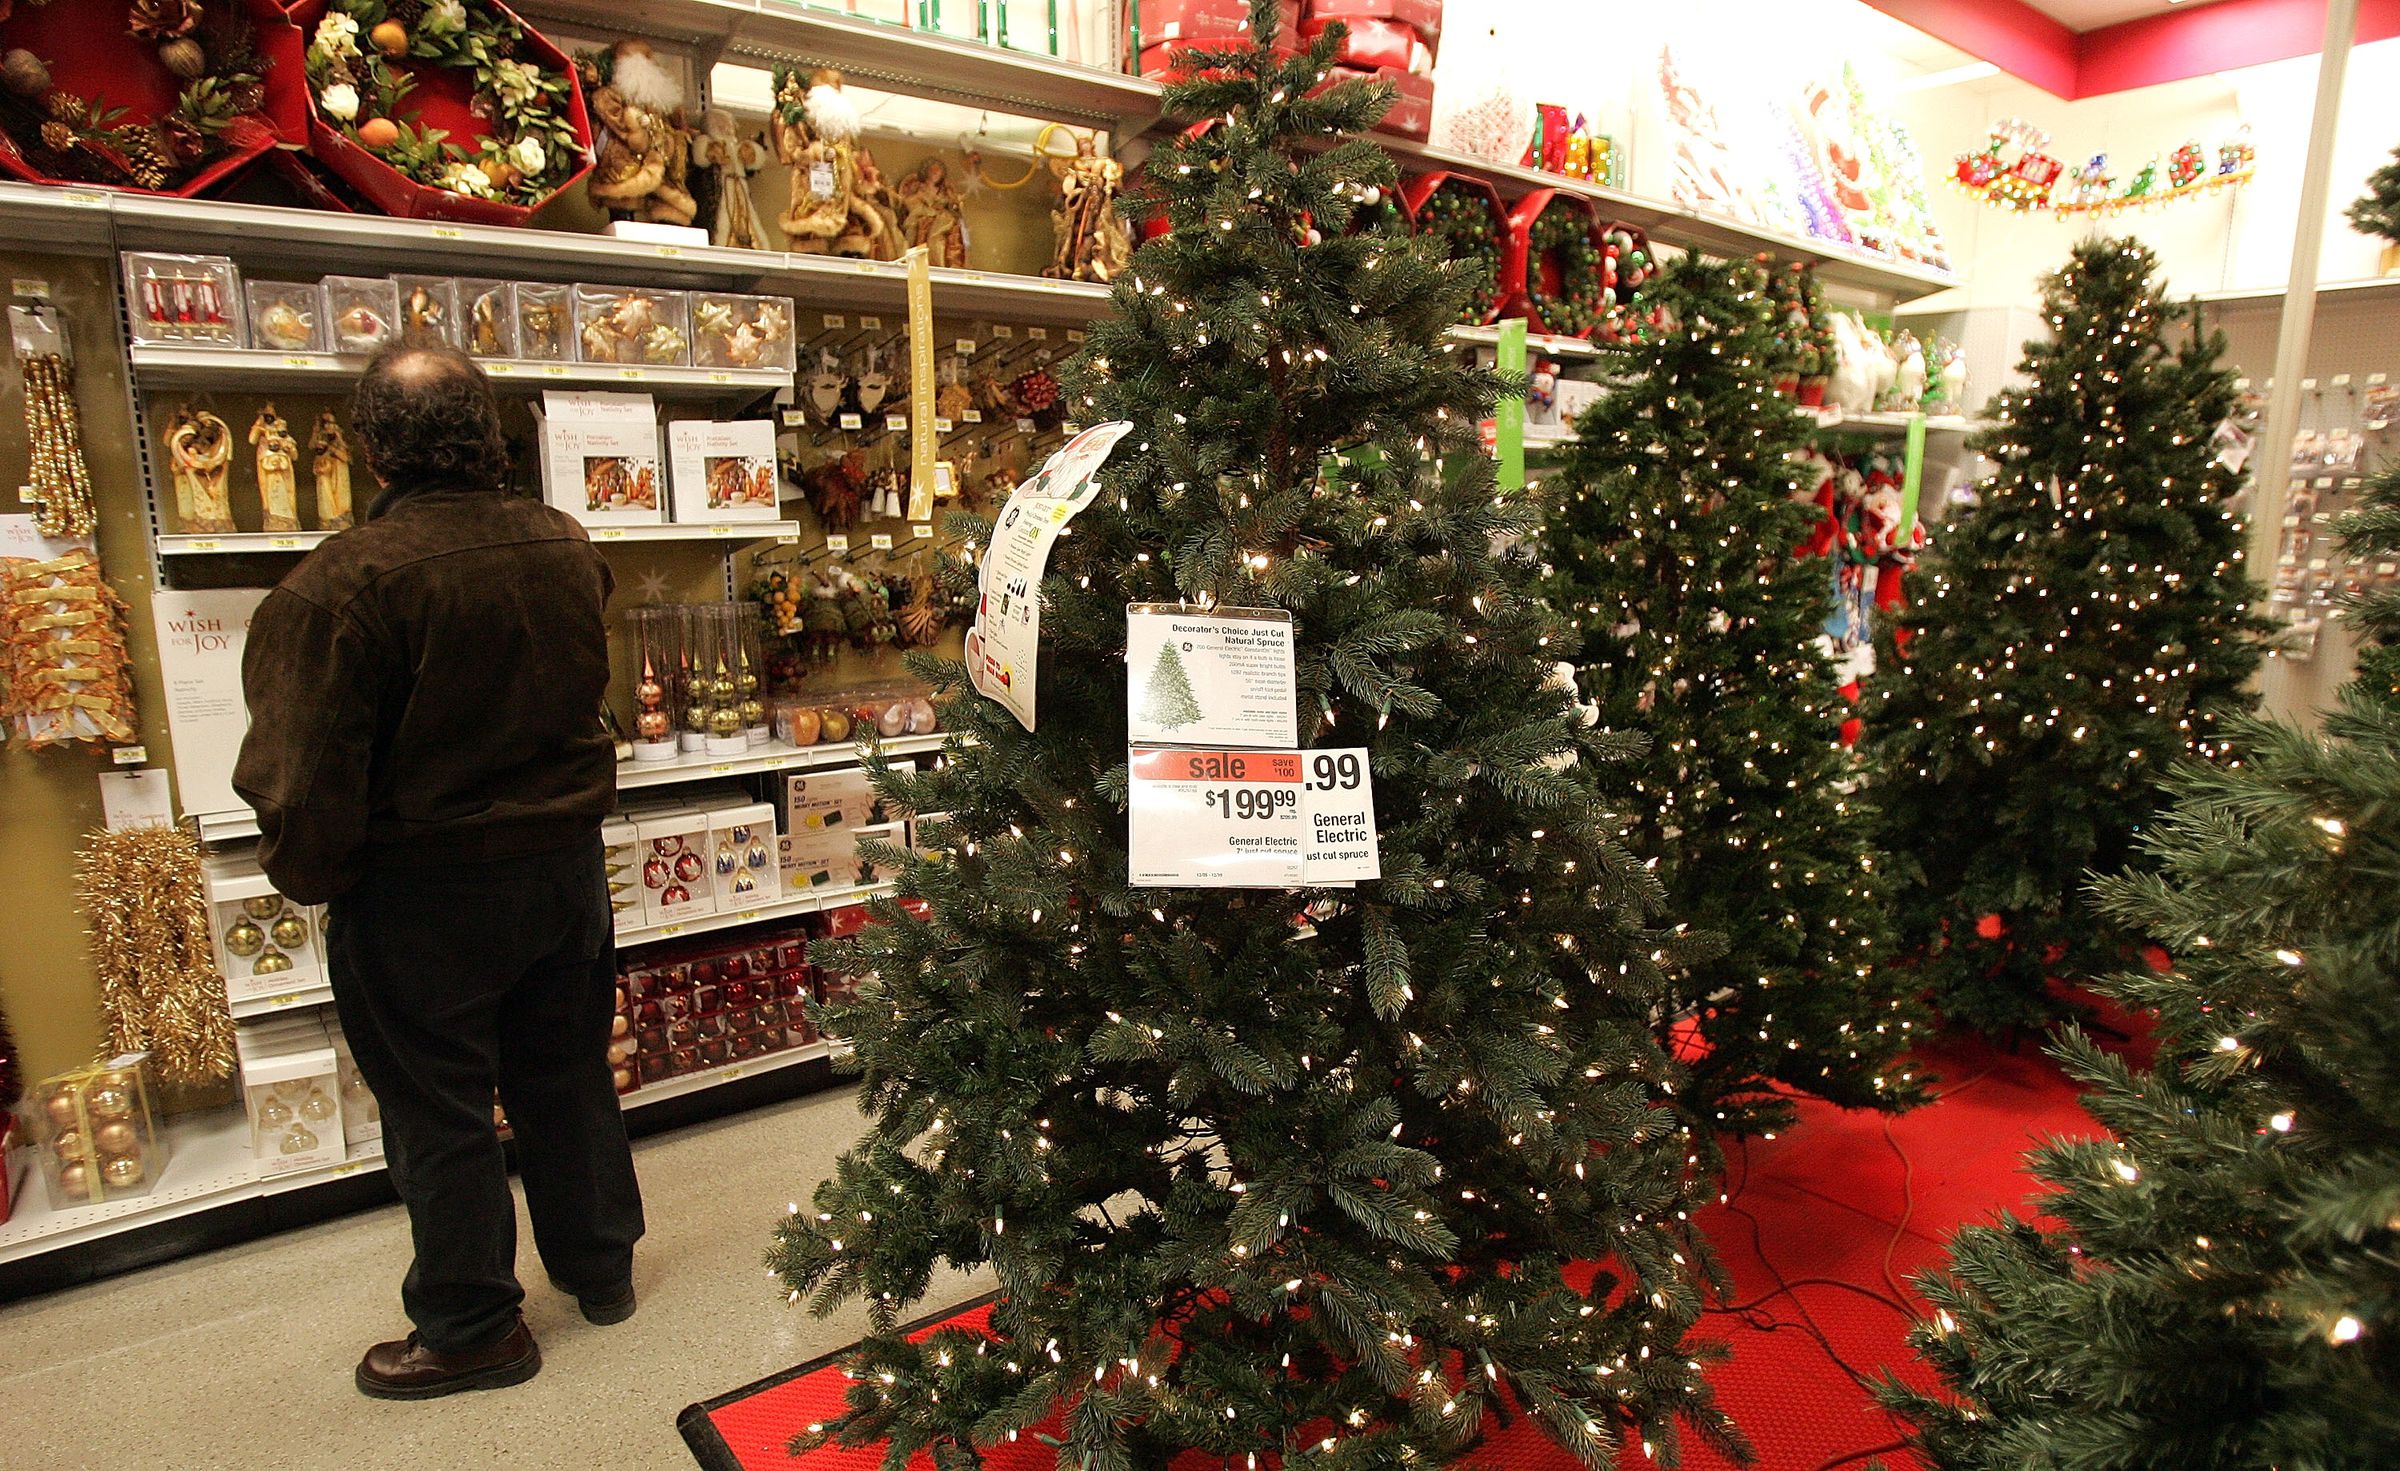 Sears Restores 'Merry Christmas' Signs After Protests